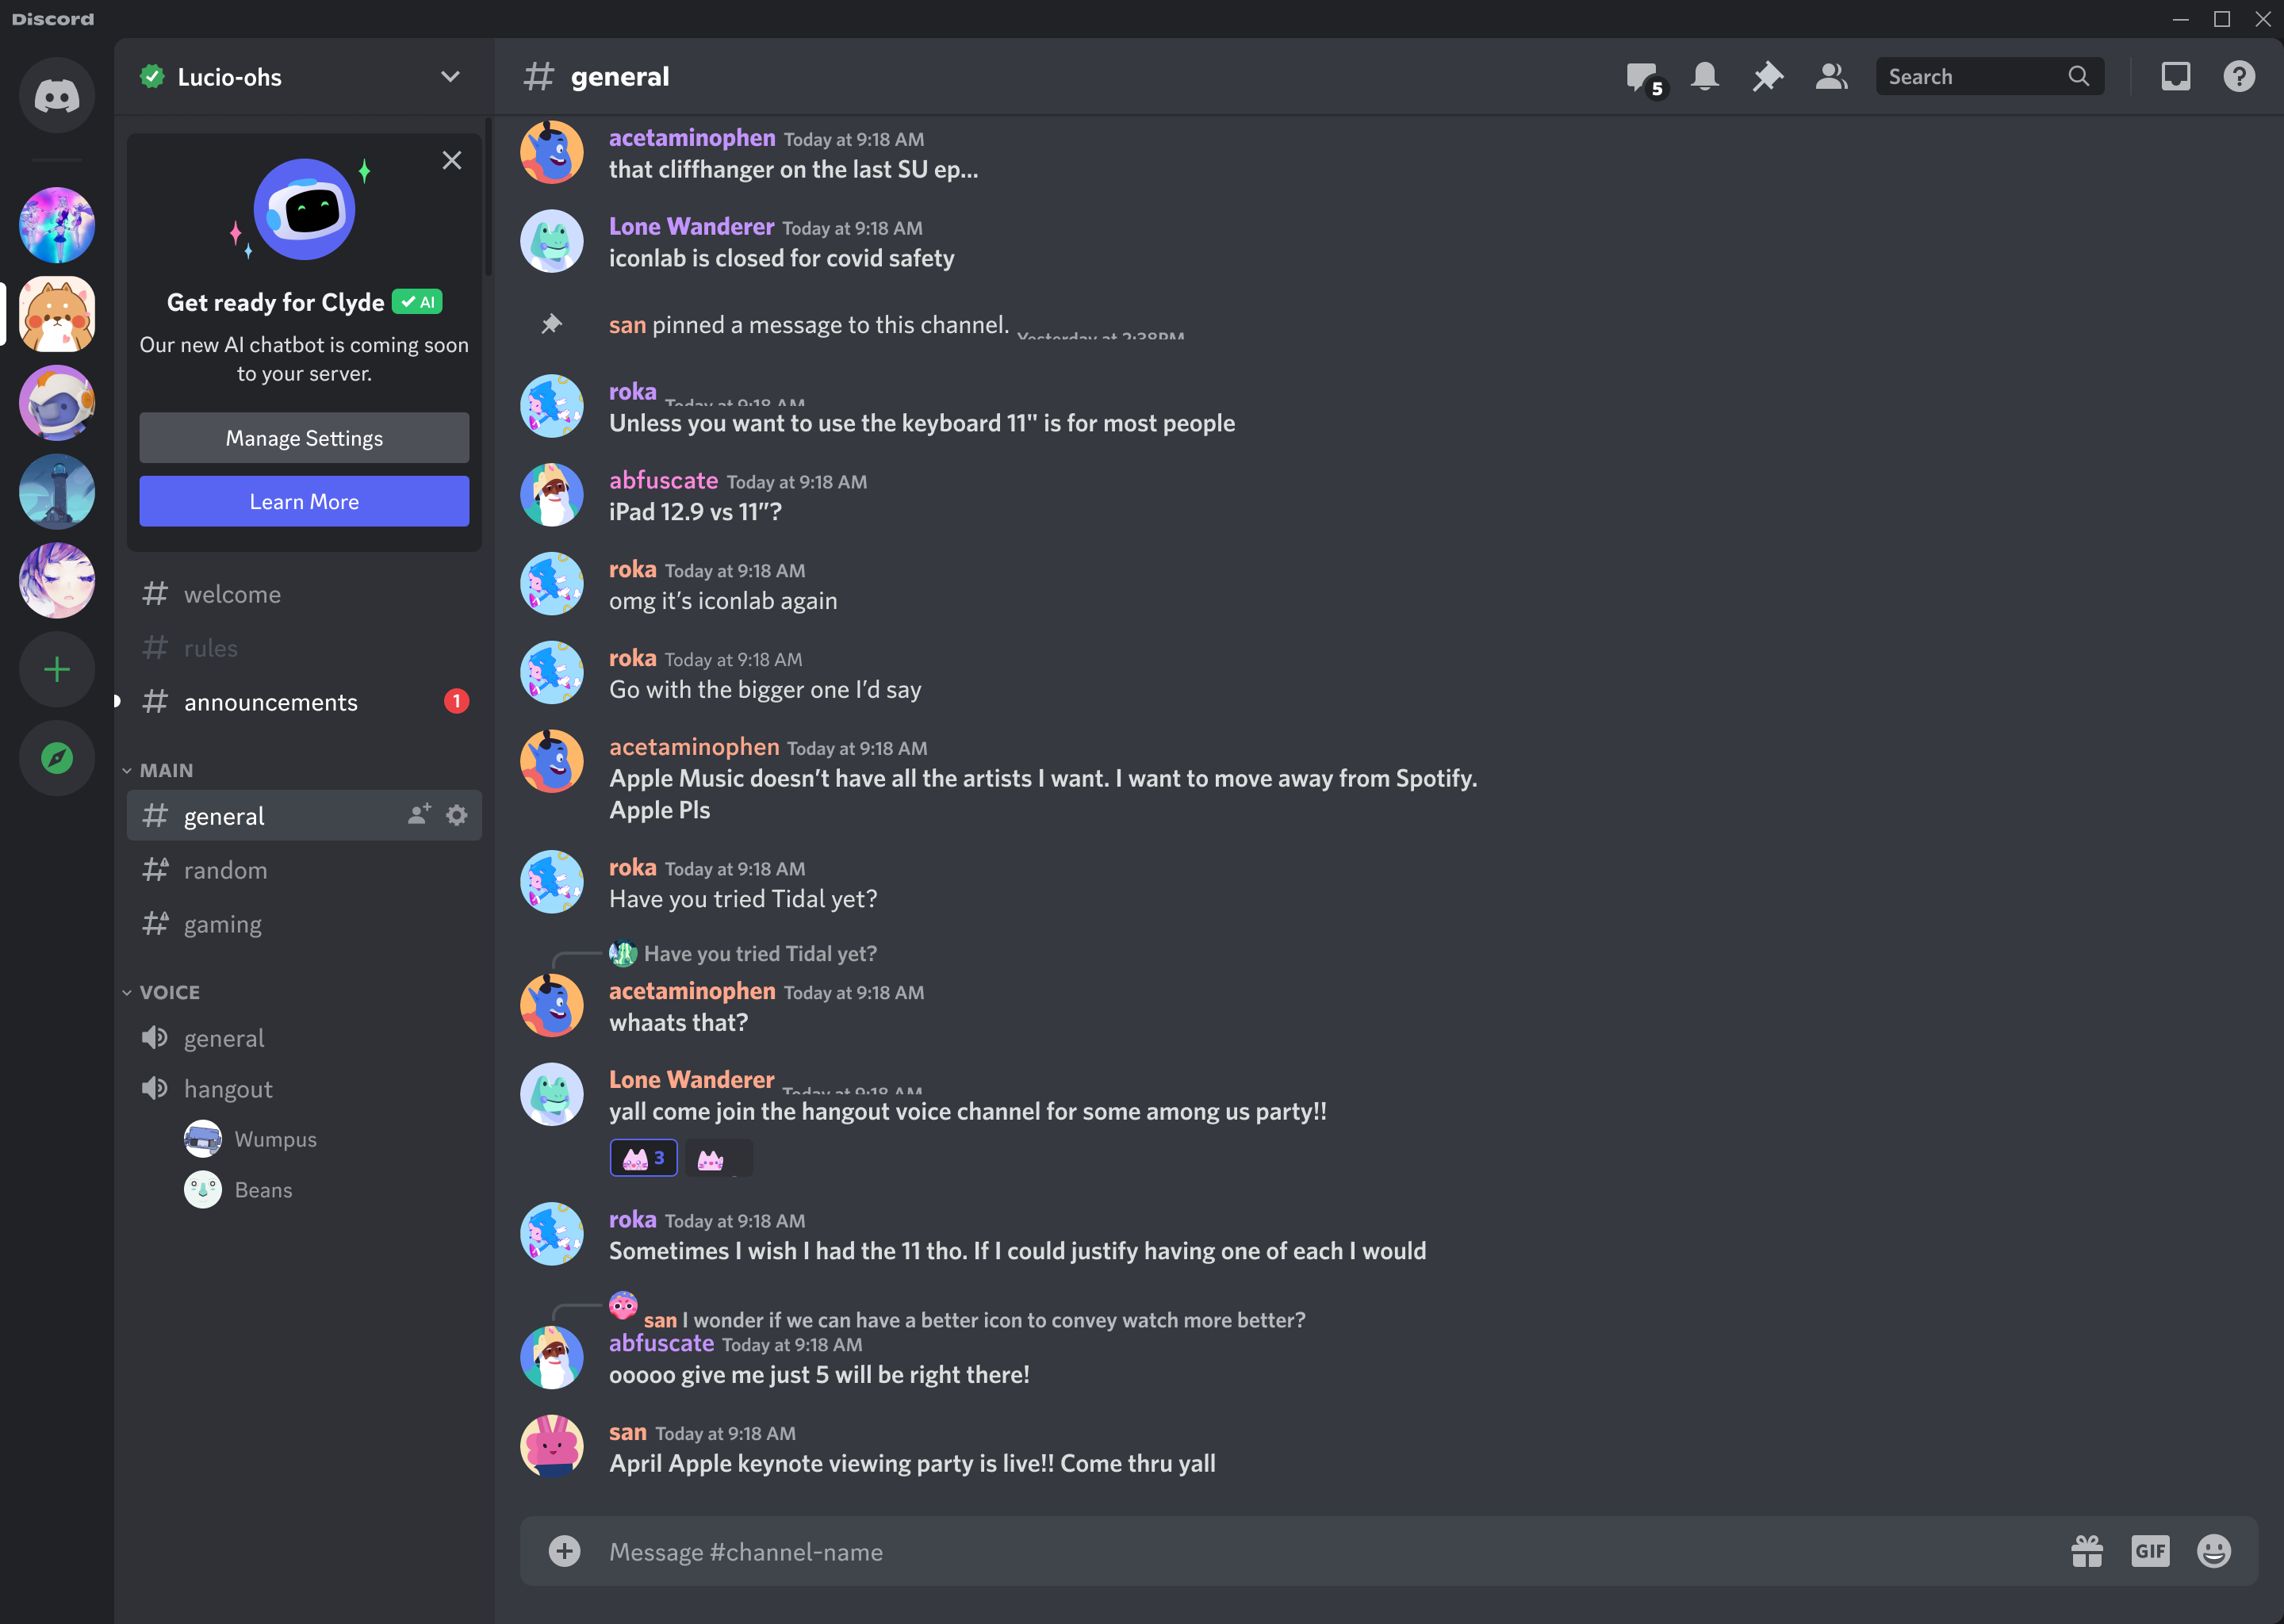 A screenshot of a Discord text channel, with a prompt to enable the new Clyde AI chatbot feature in the top left corner